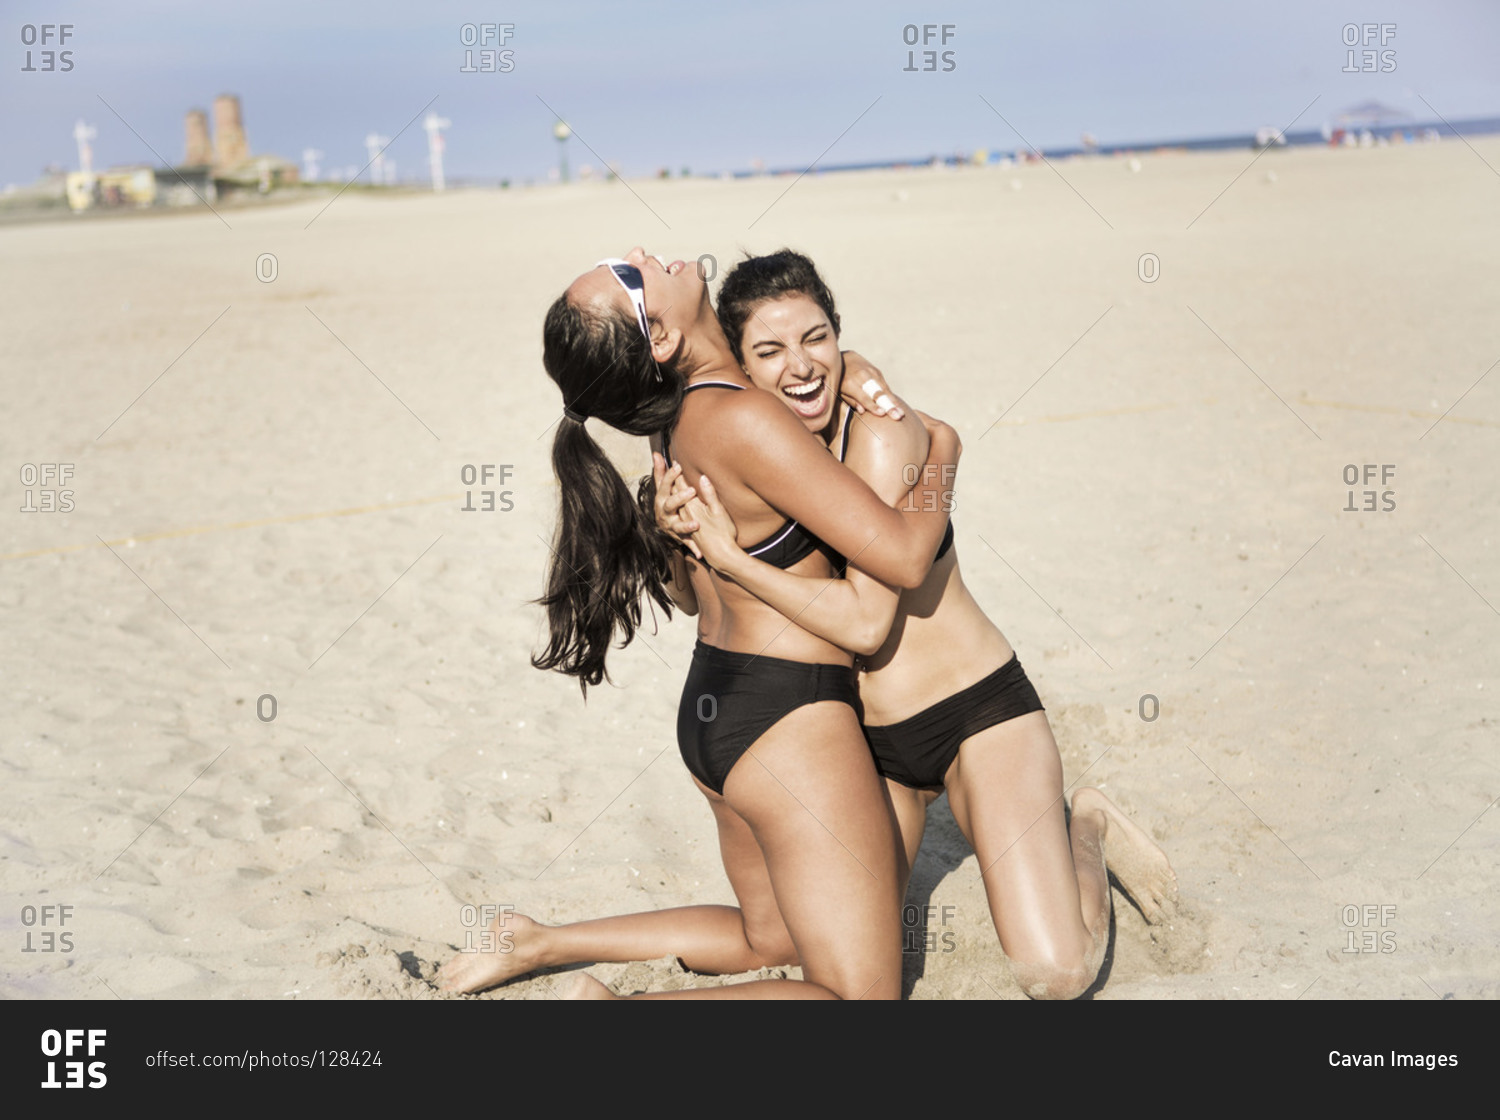 Two young women cheering at beach volleyball court